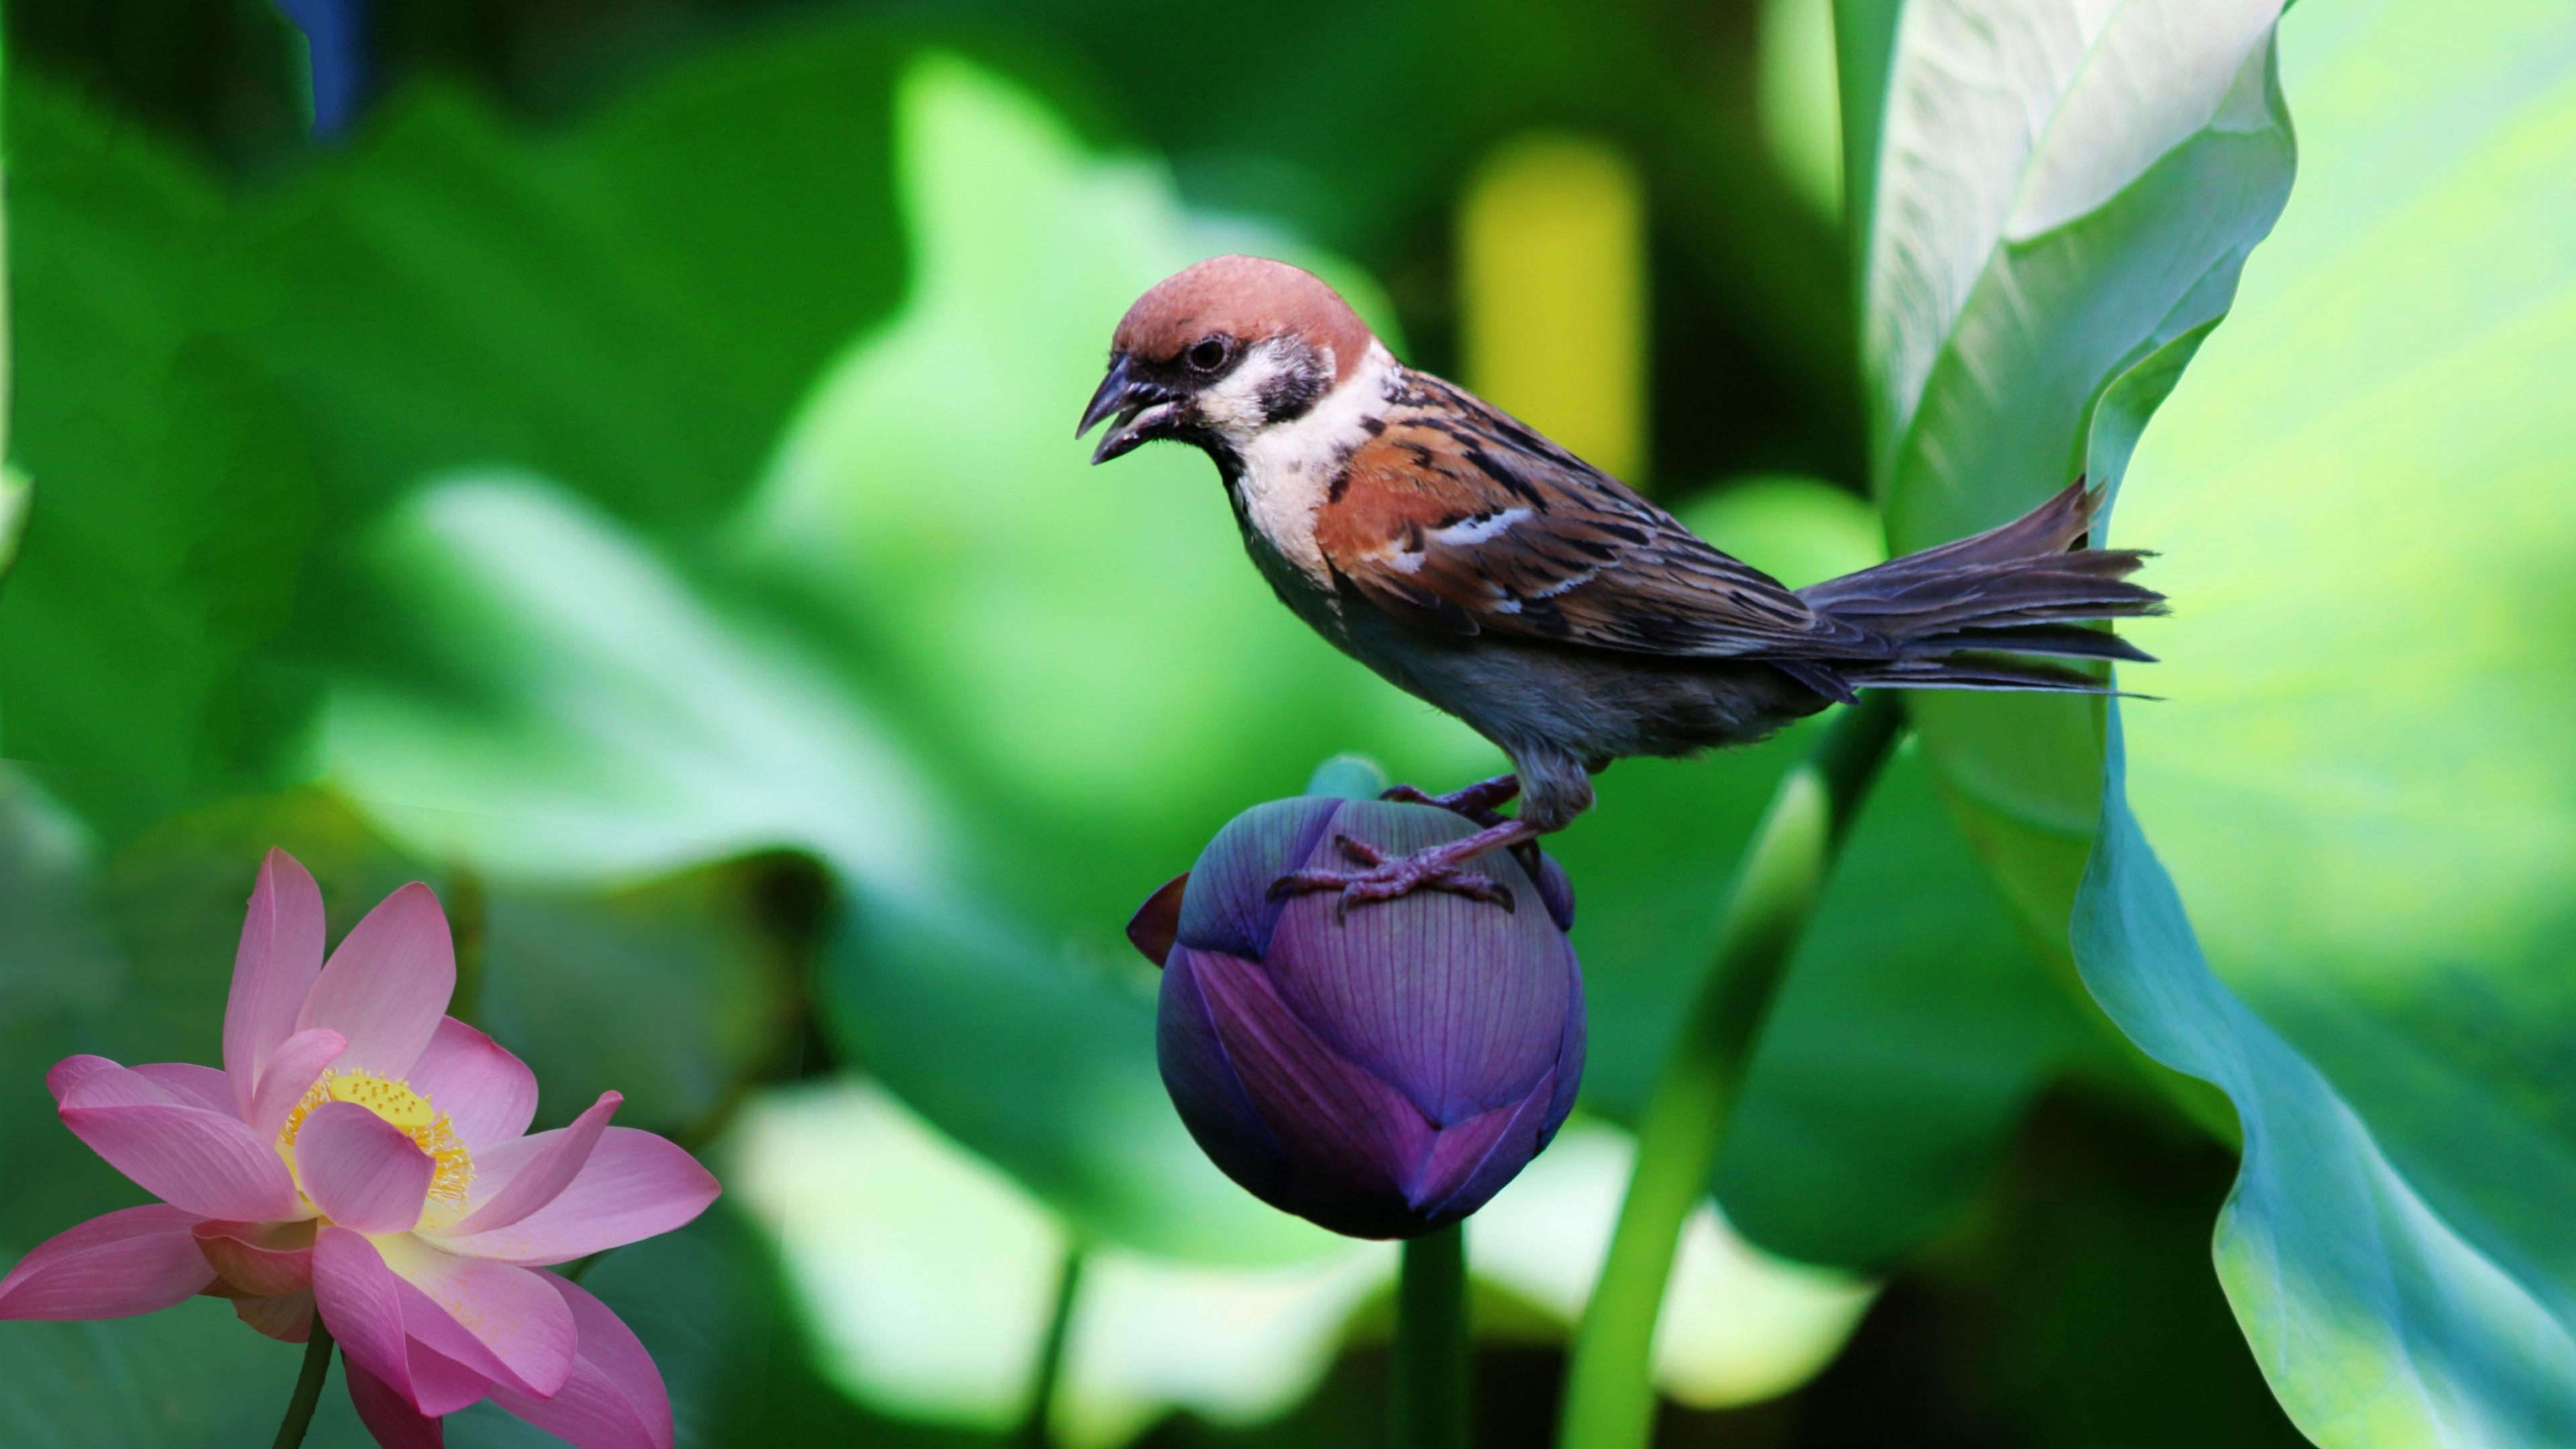 Birds and Flowers Pictures 4k 3840x2160